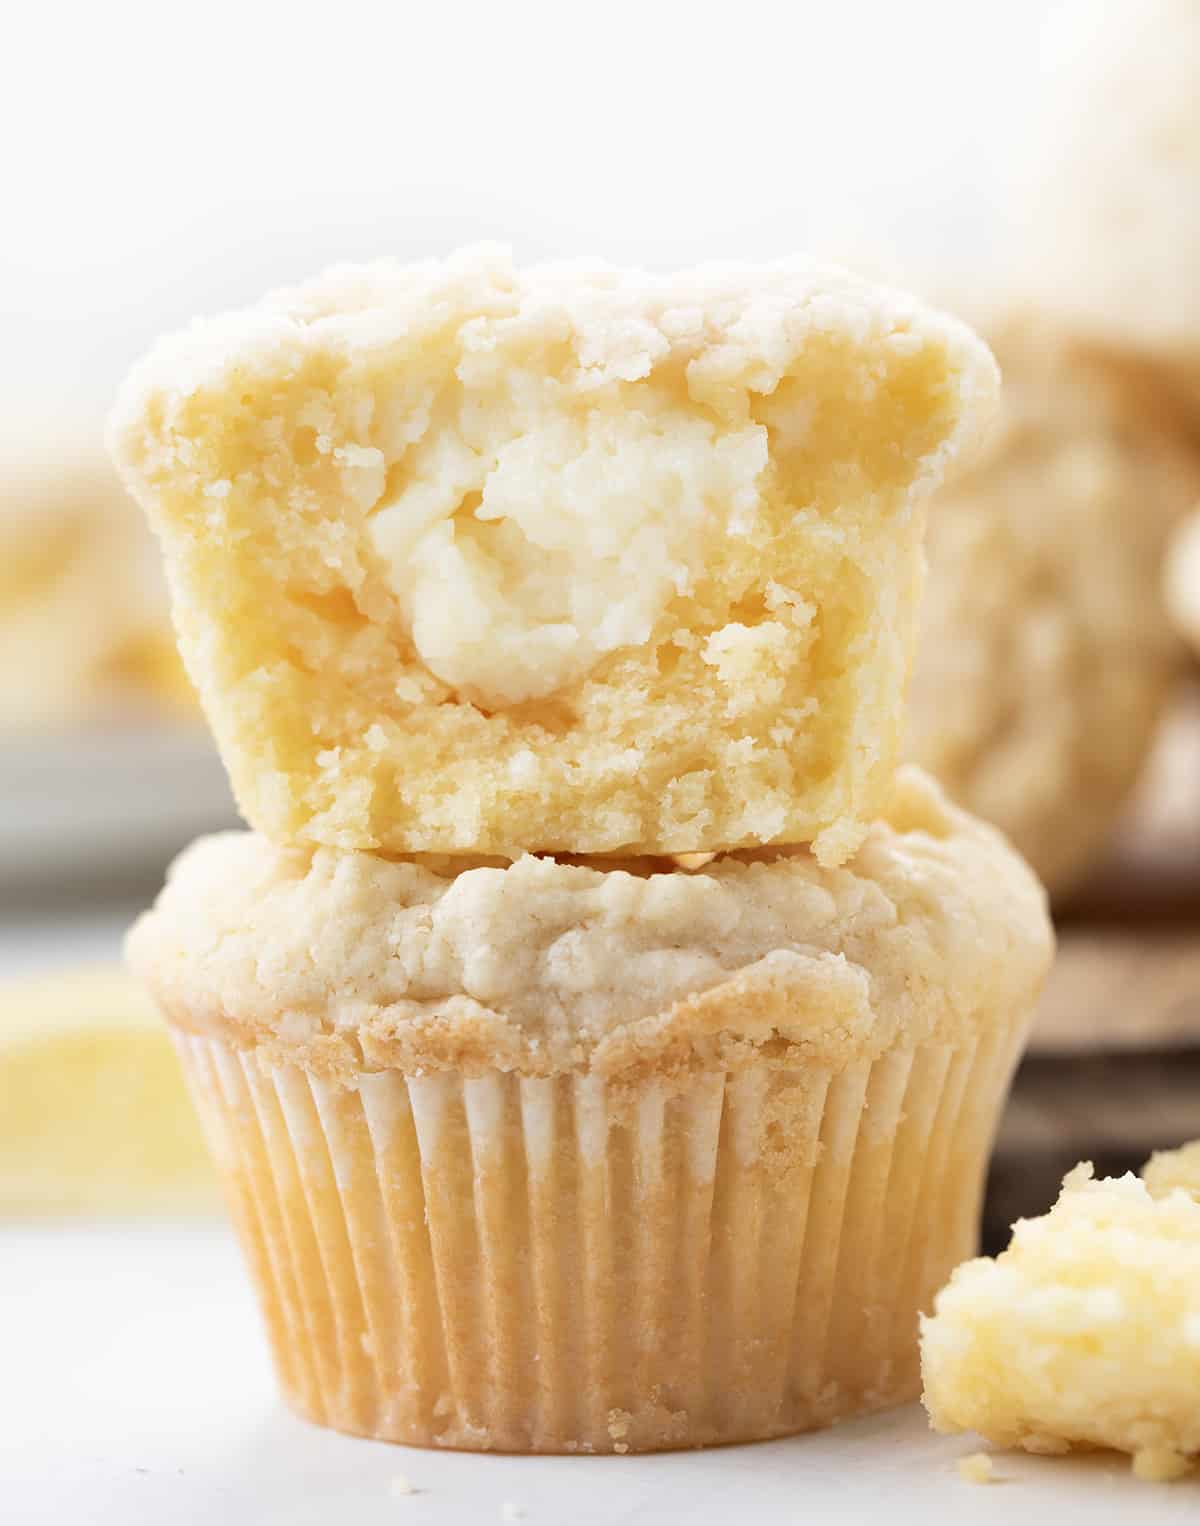 Two Lemon Cream Cheese Muffins with top muffin halved so you can see the inside texture and cream cheese.